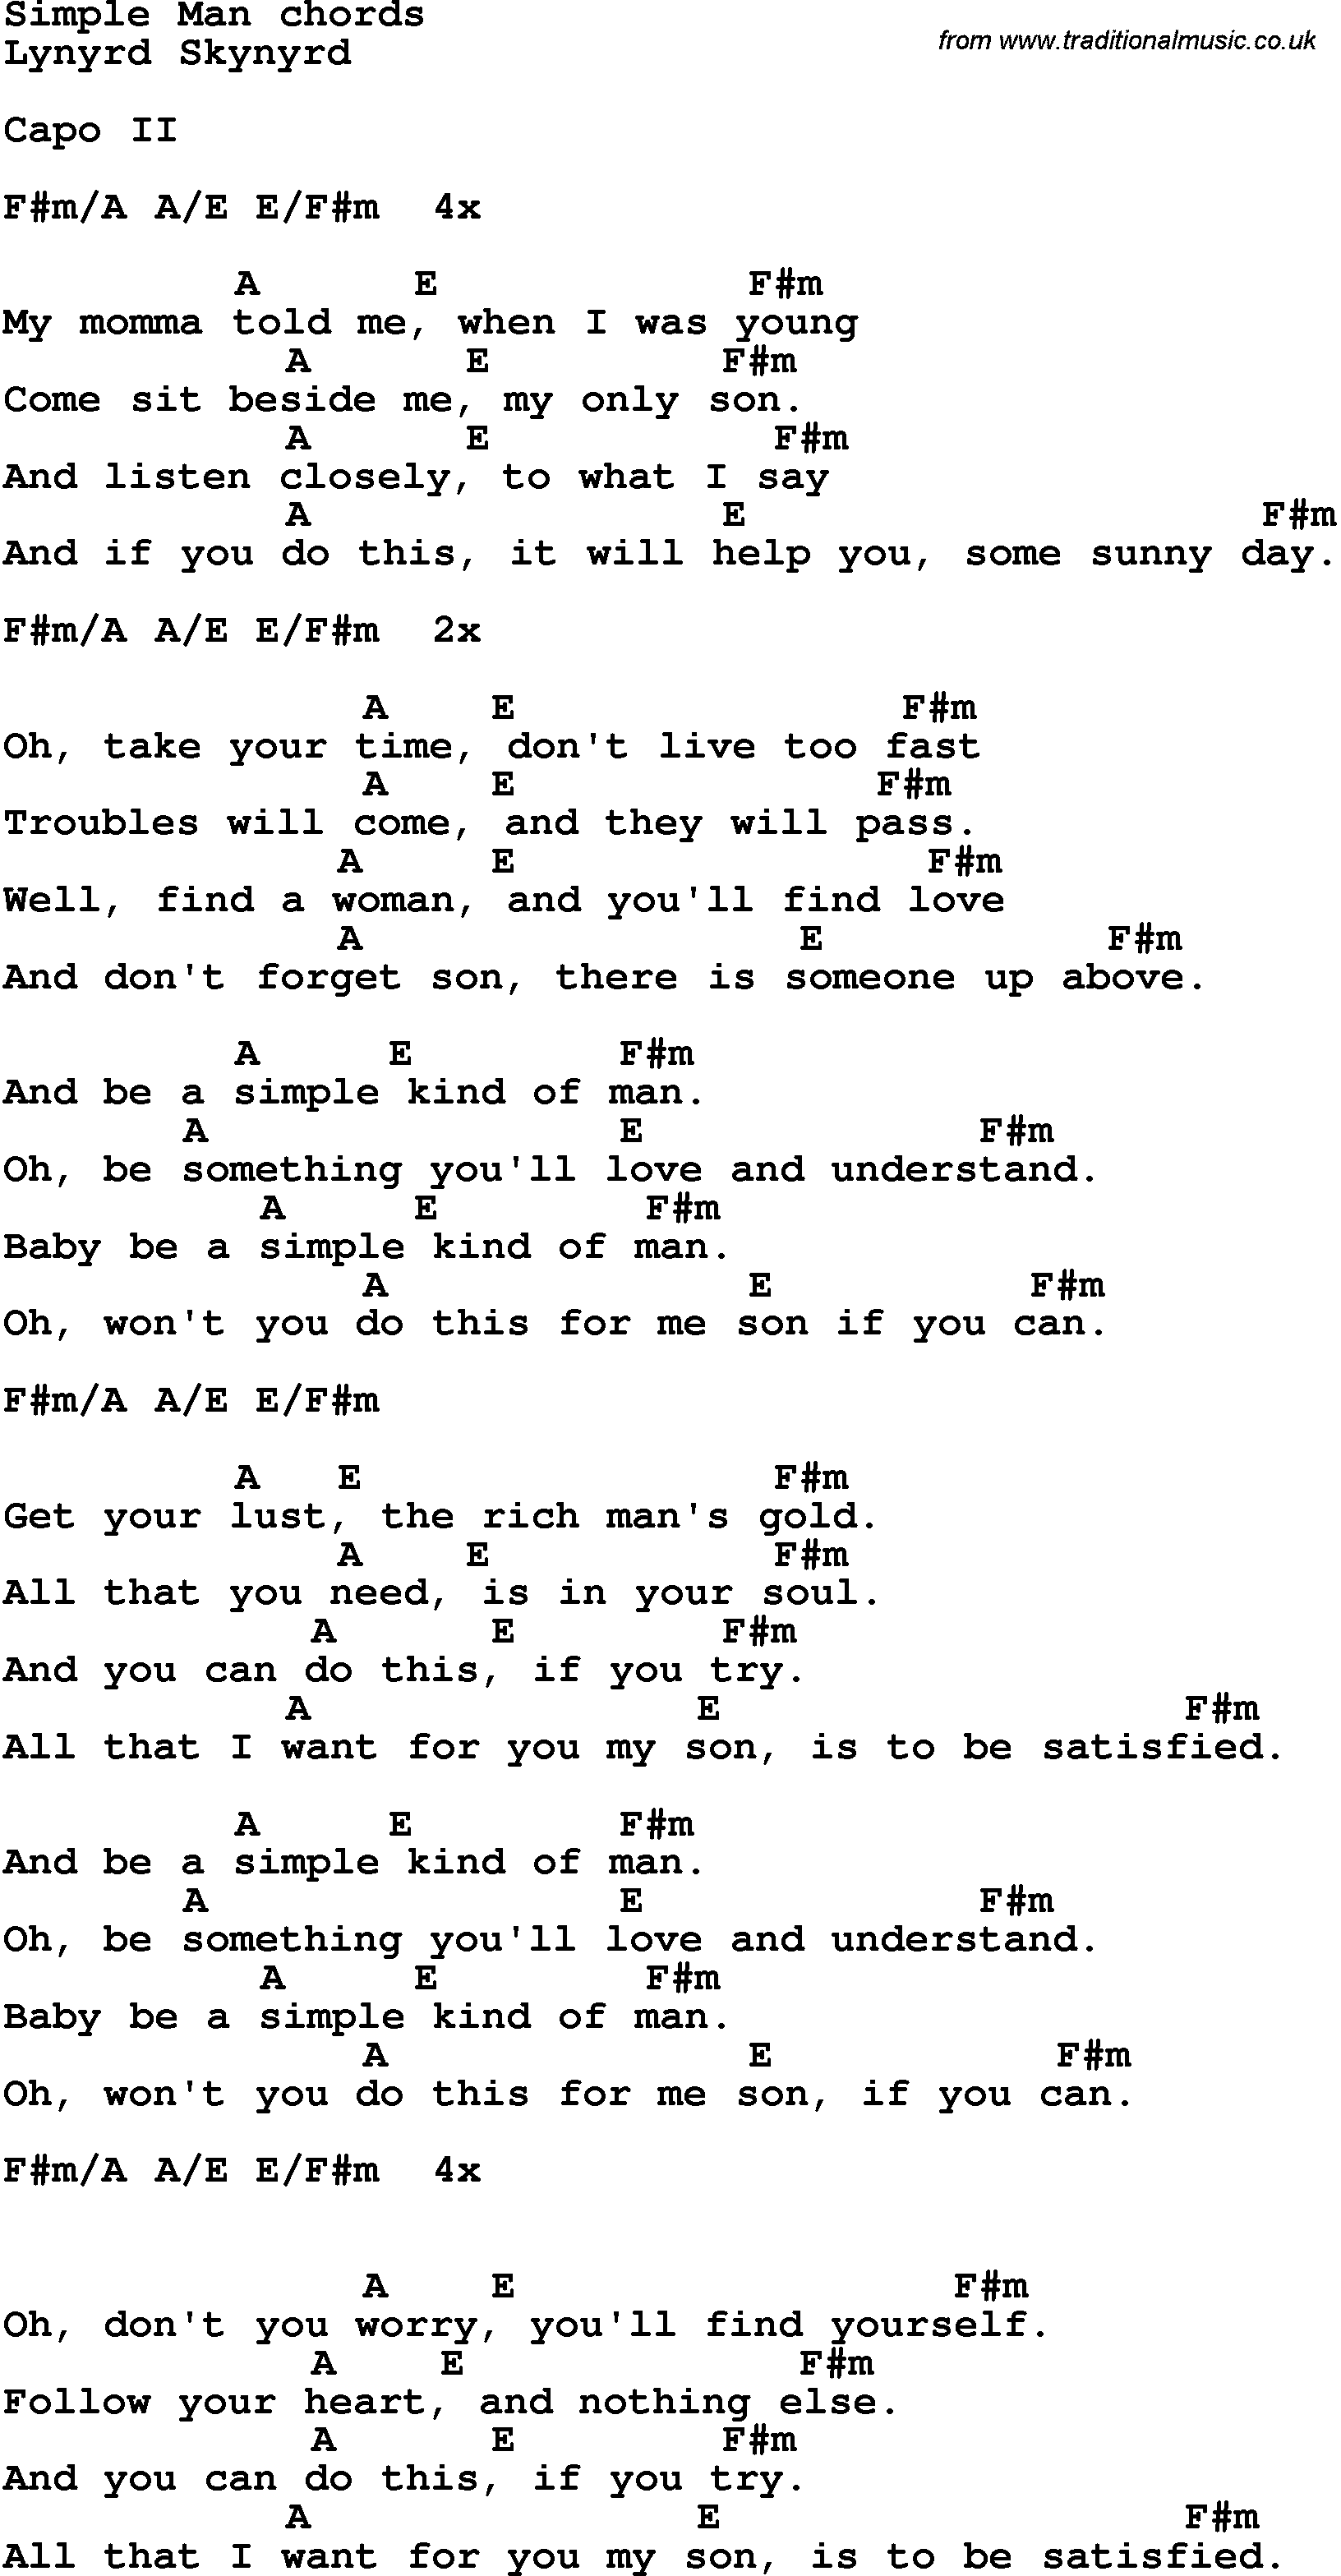 Song Lyrics with guitar chords for Simple Man